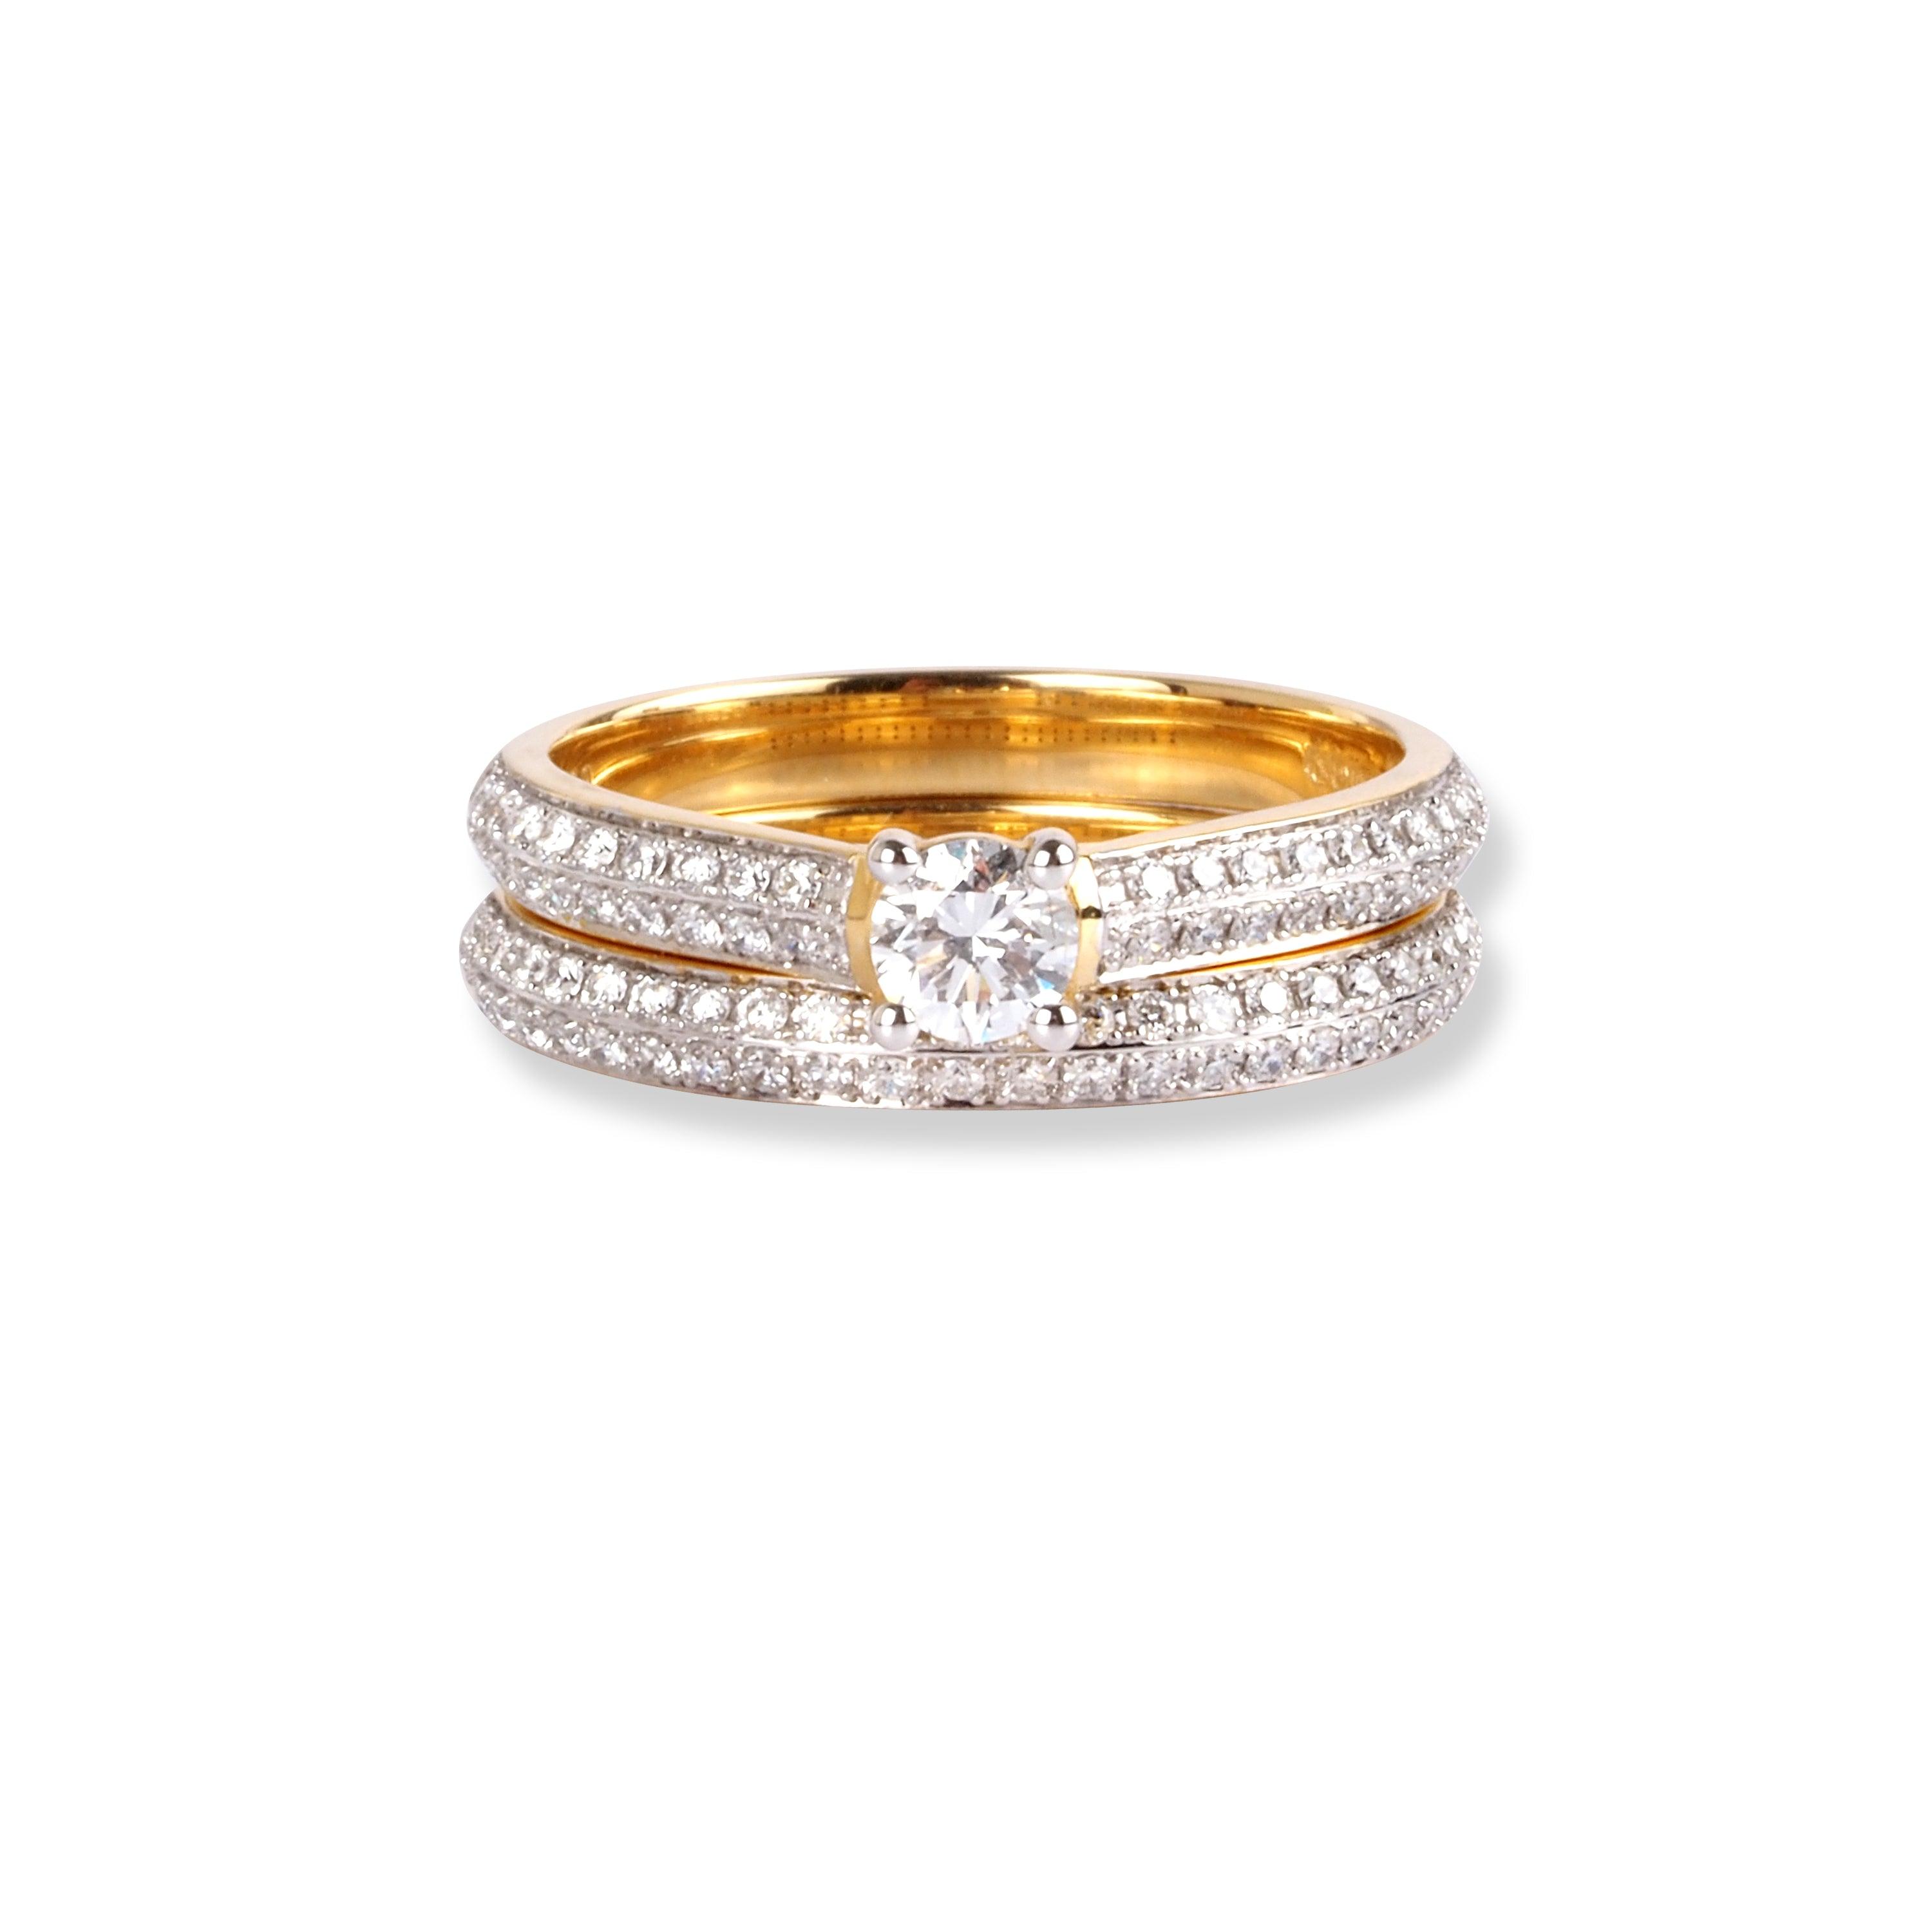 18ct Yellow Gold Diamond Engagement Ring and Wedding Band Set LR-6650 - Minar Jewellers